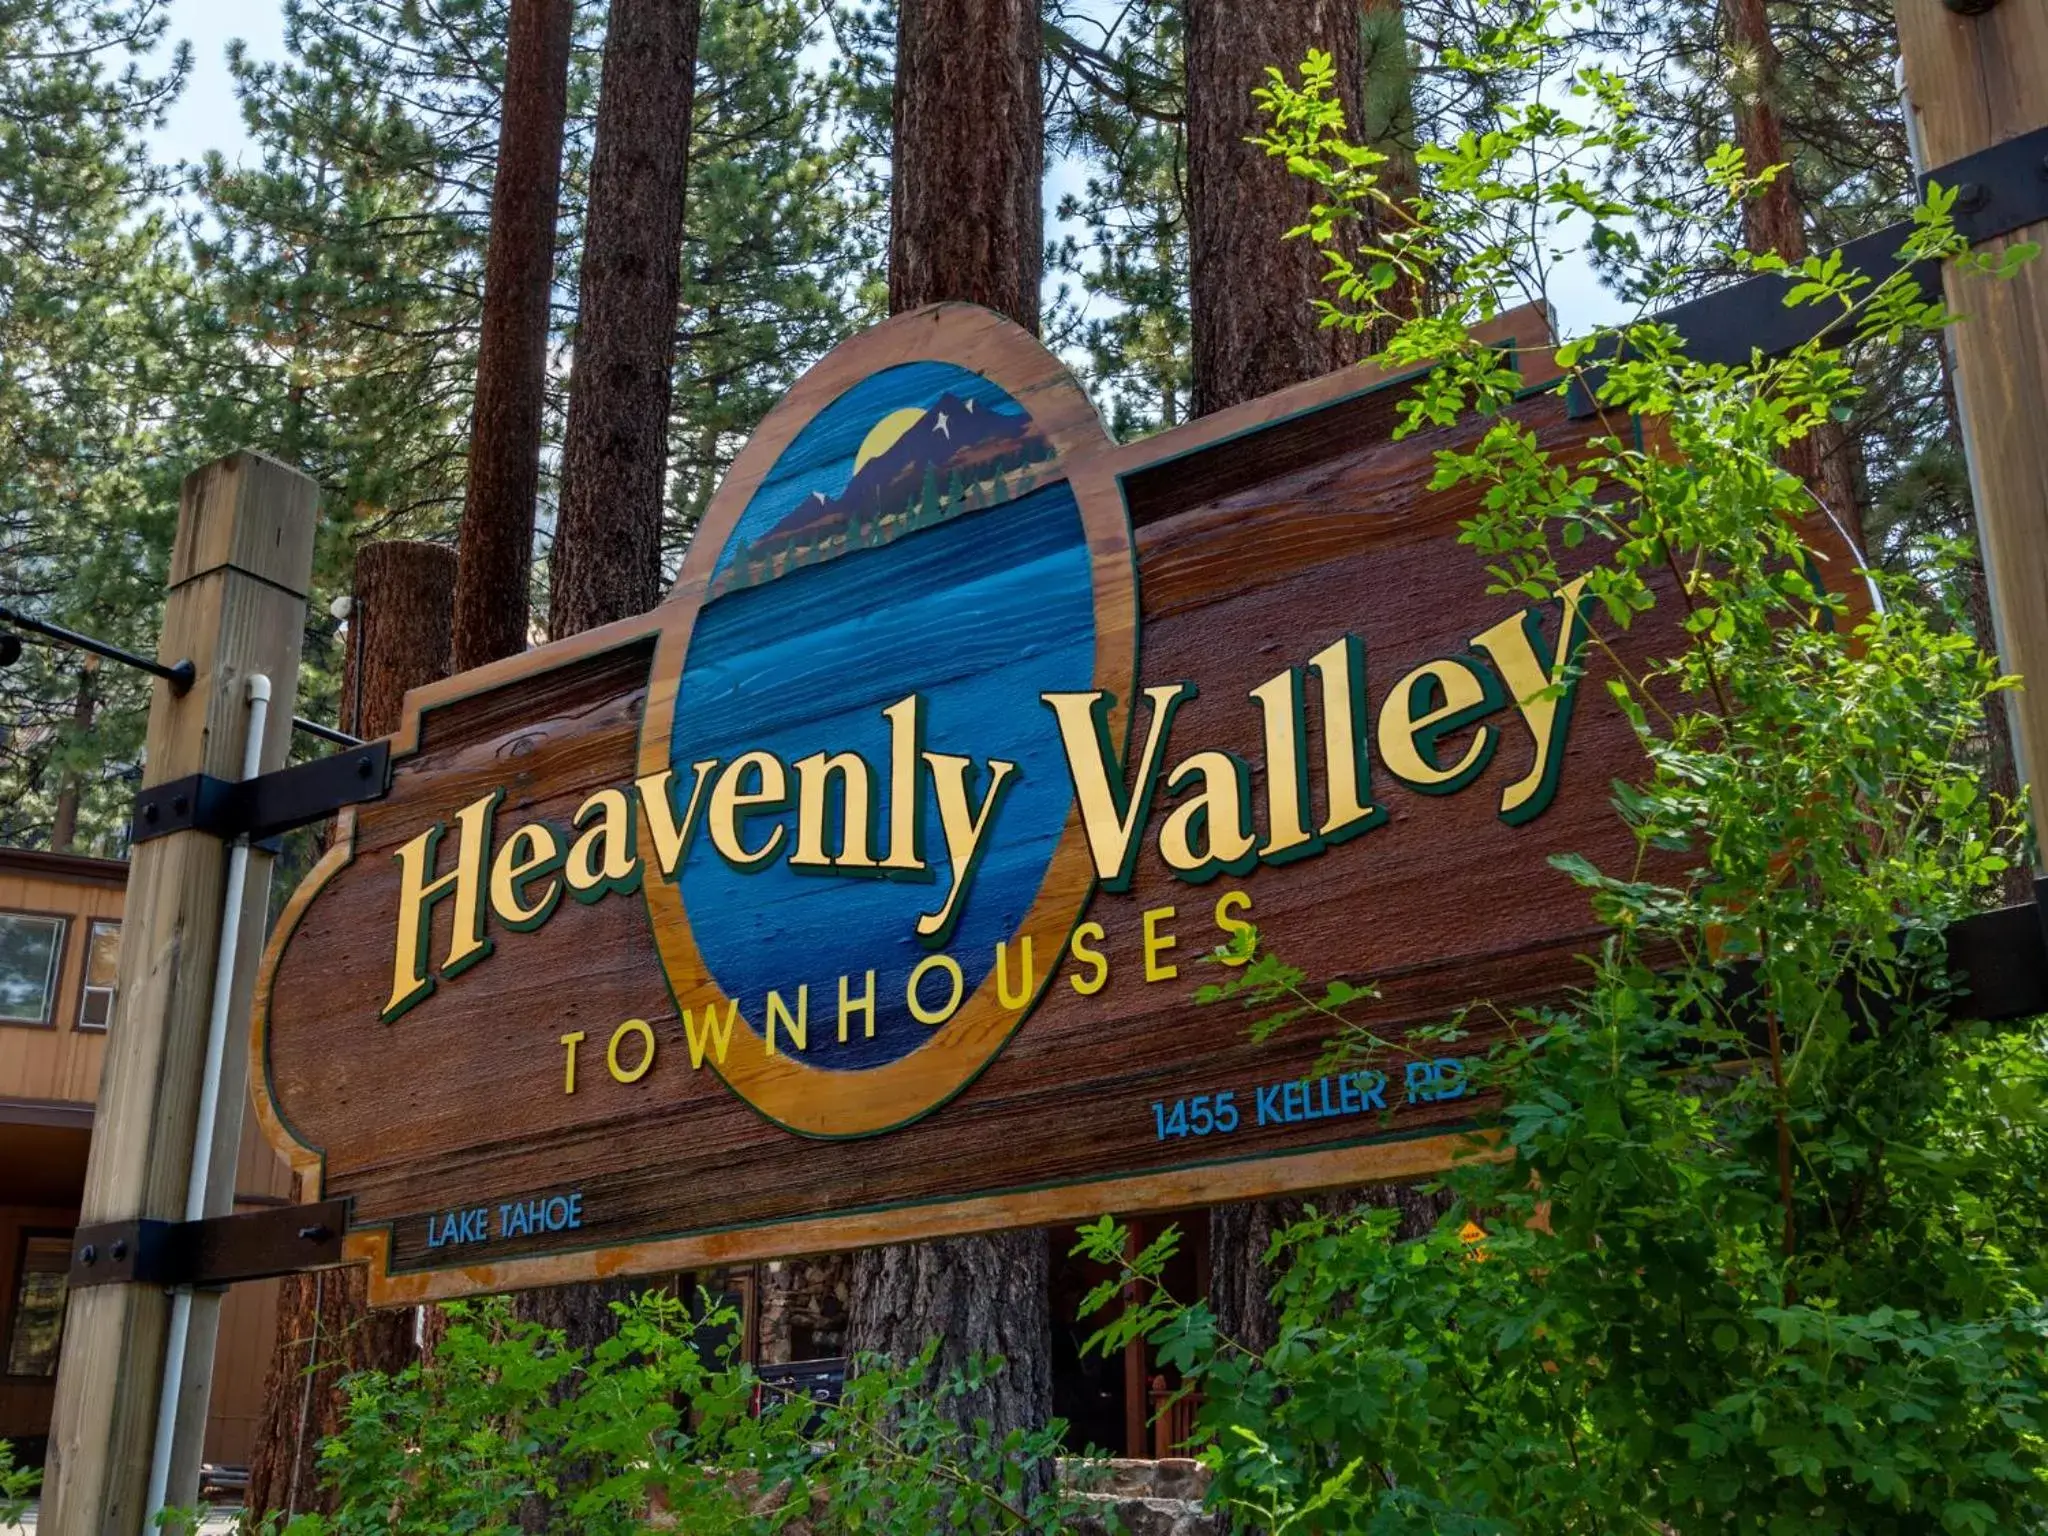 Property logo or sign in Heavenly Valley Townhouses